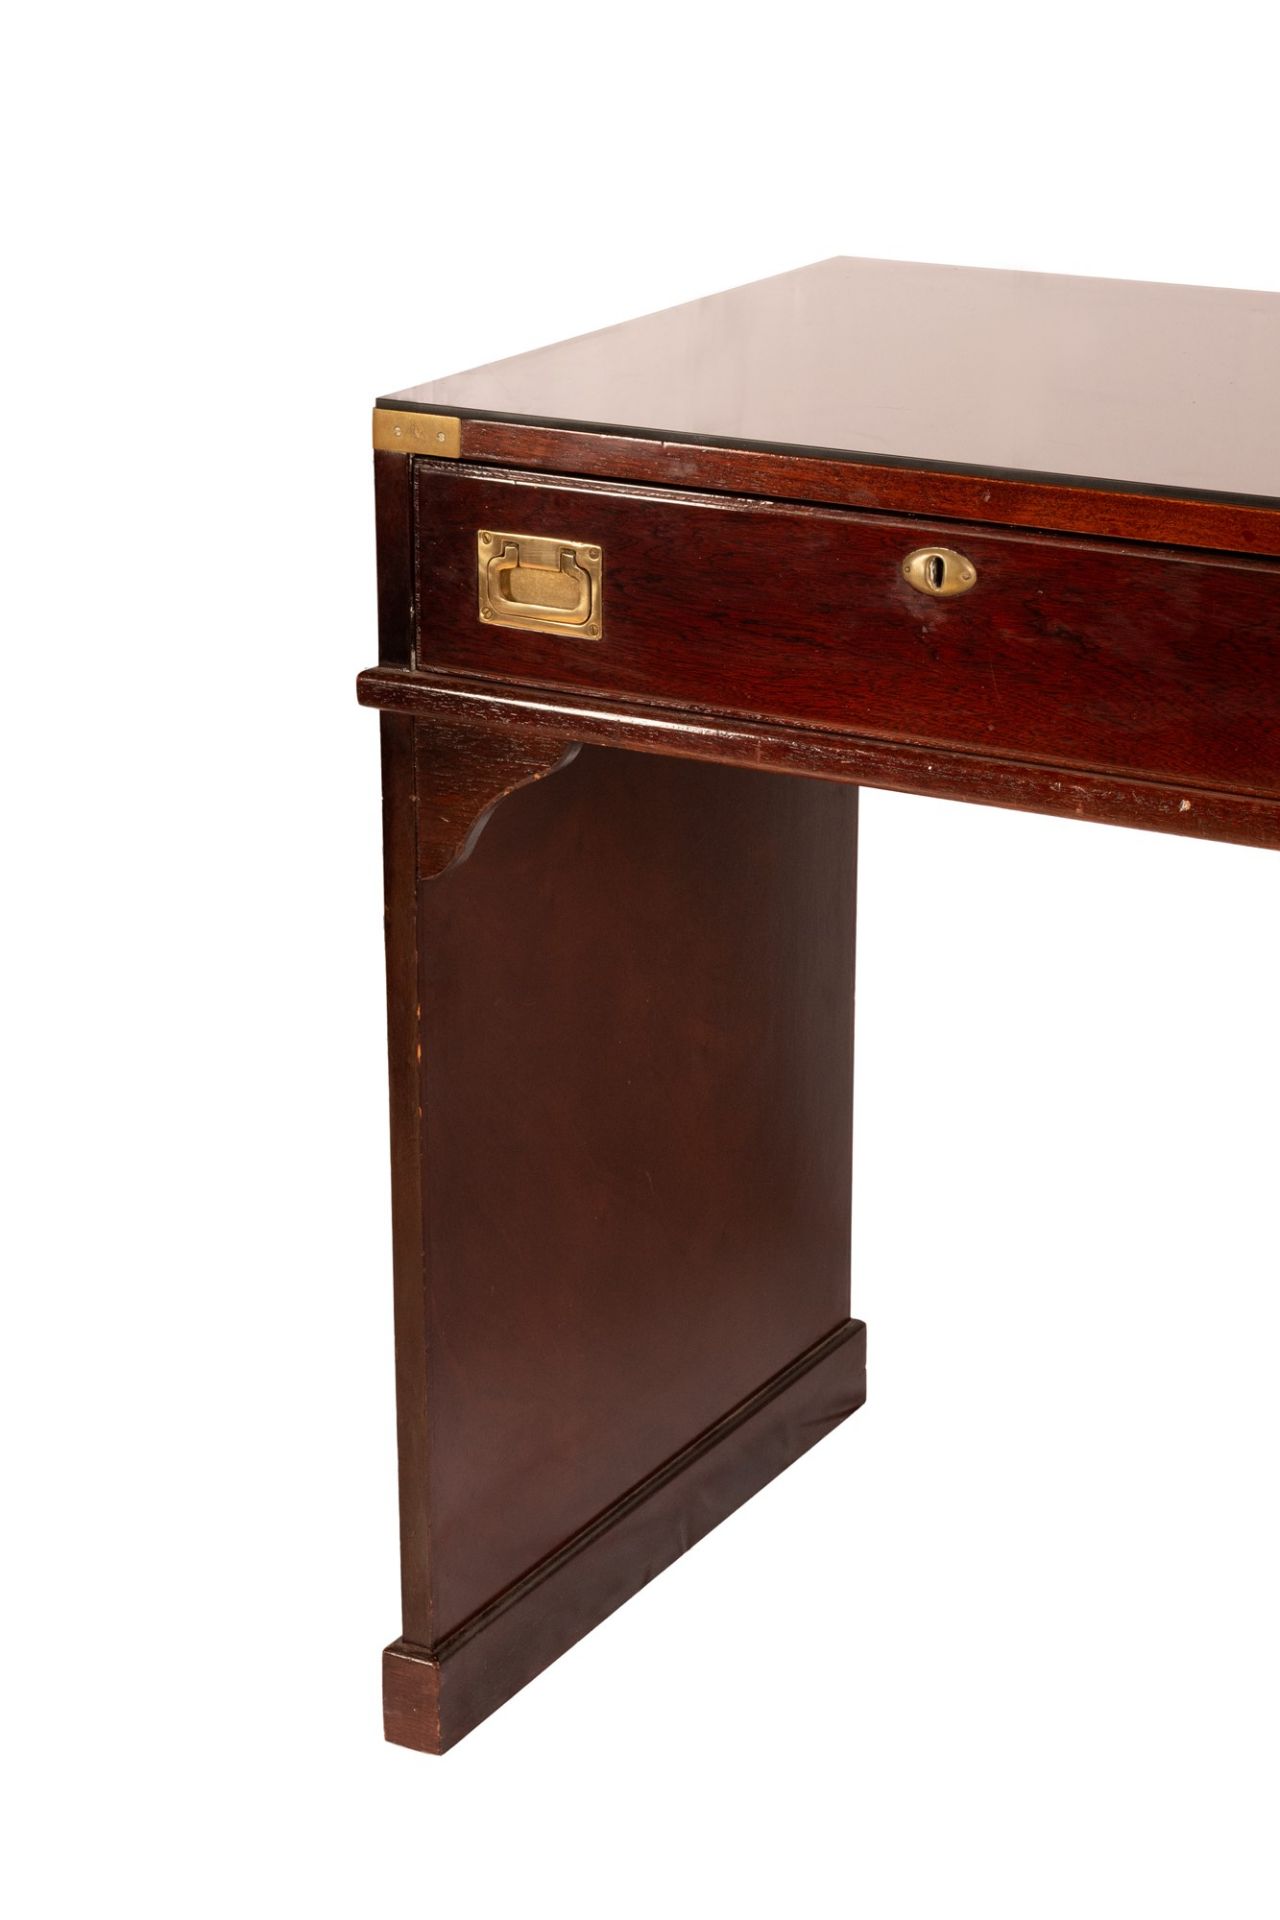 Byron marine style mahogany desk with five drawers on the front and glass top - Bild 8 aus 19